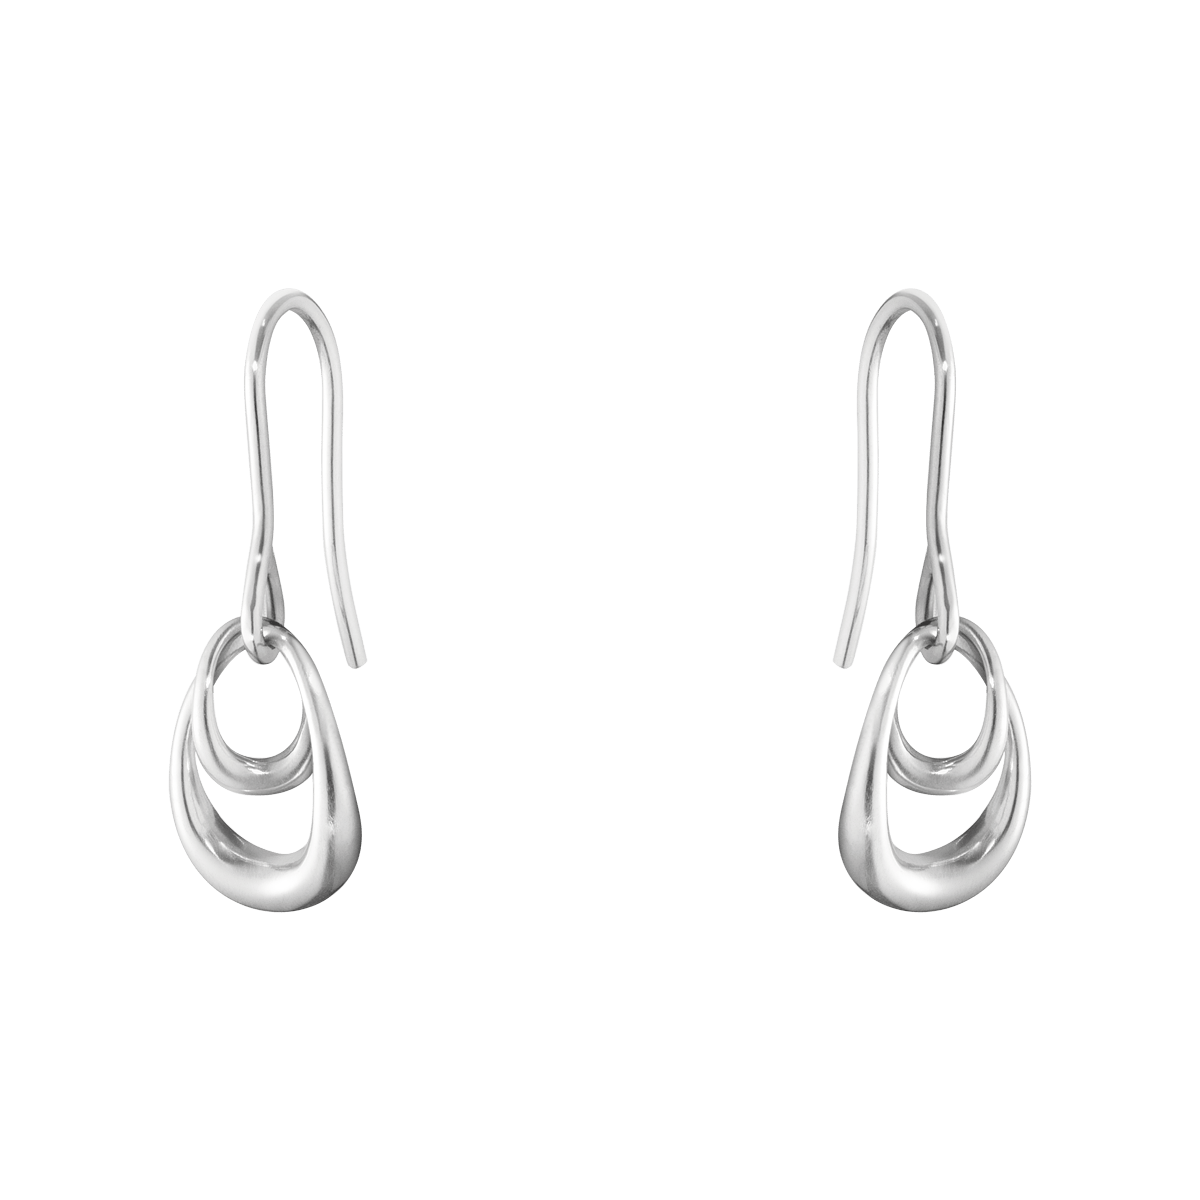 Offspring silver mother and childearrings | Georg Jensen